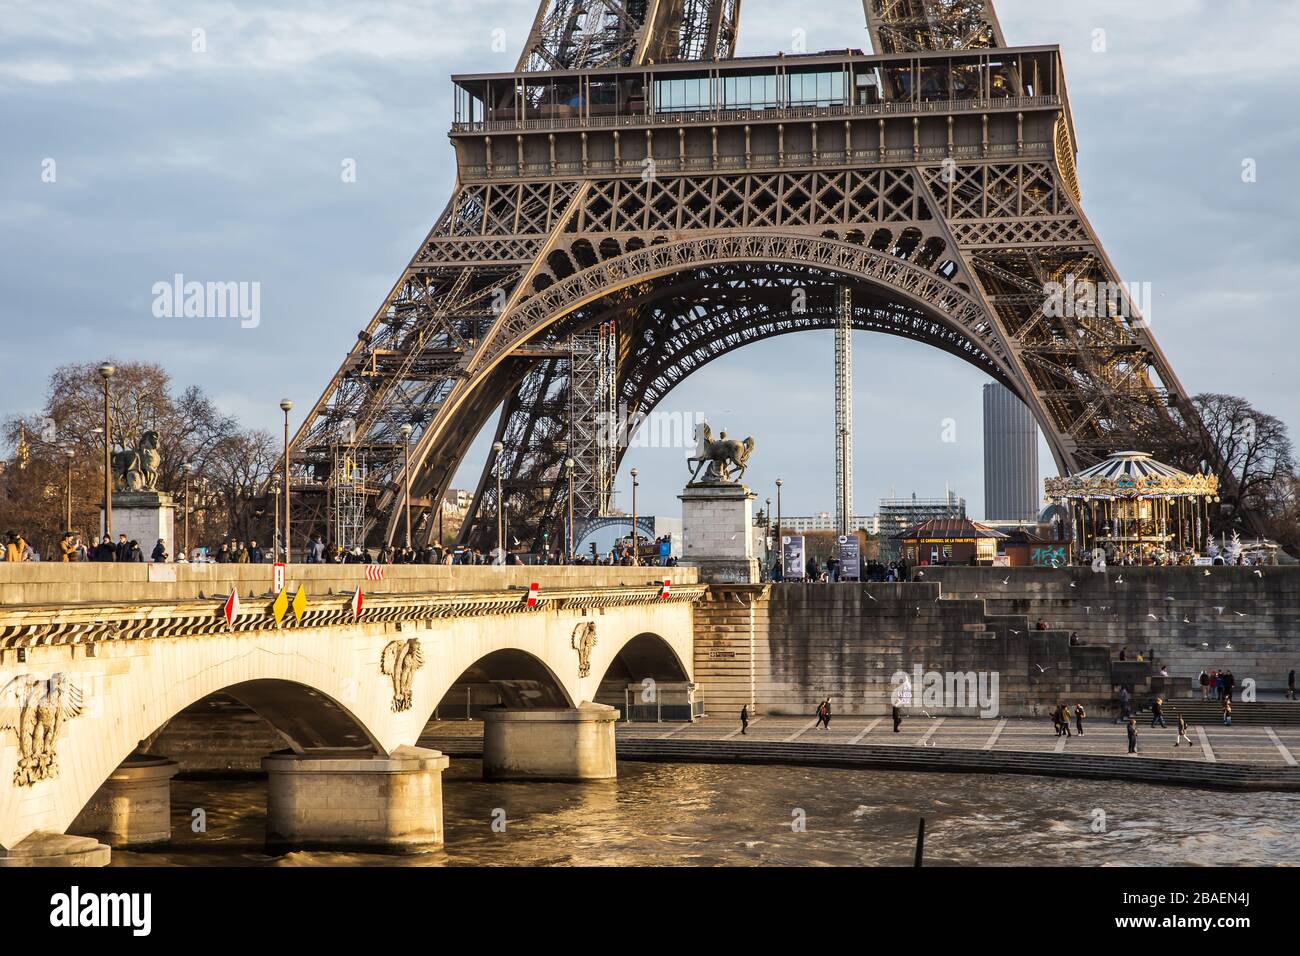 Paris , France - December 15, 2019: View on the famous paris eiffel tower from the promenade of the Seine . Stock Photo